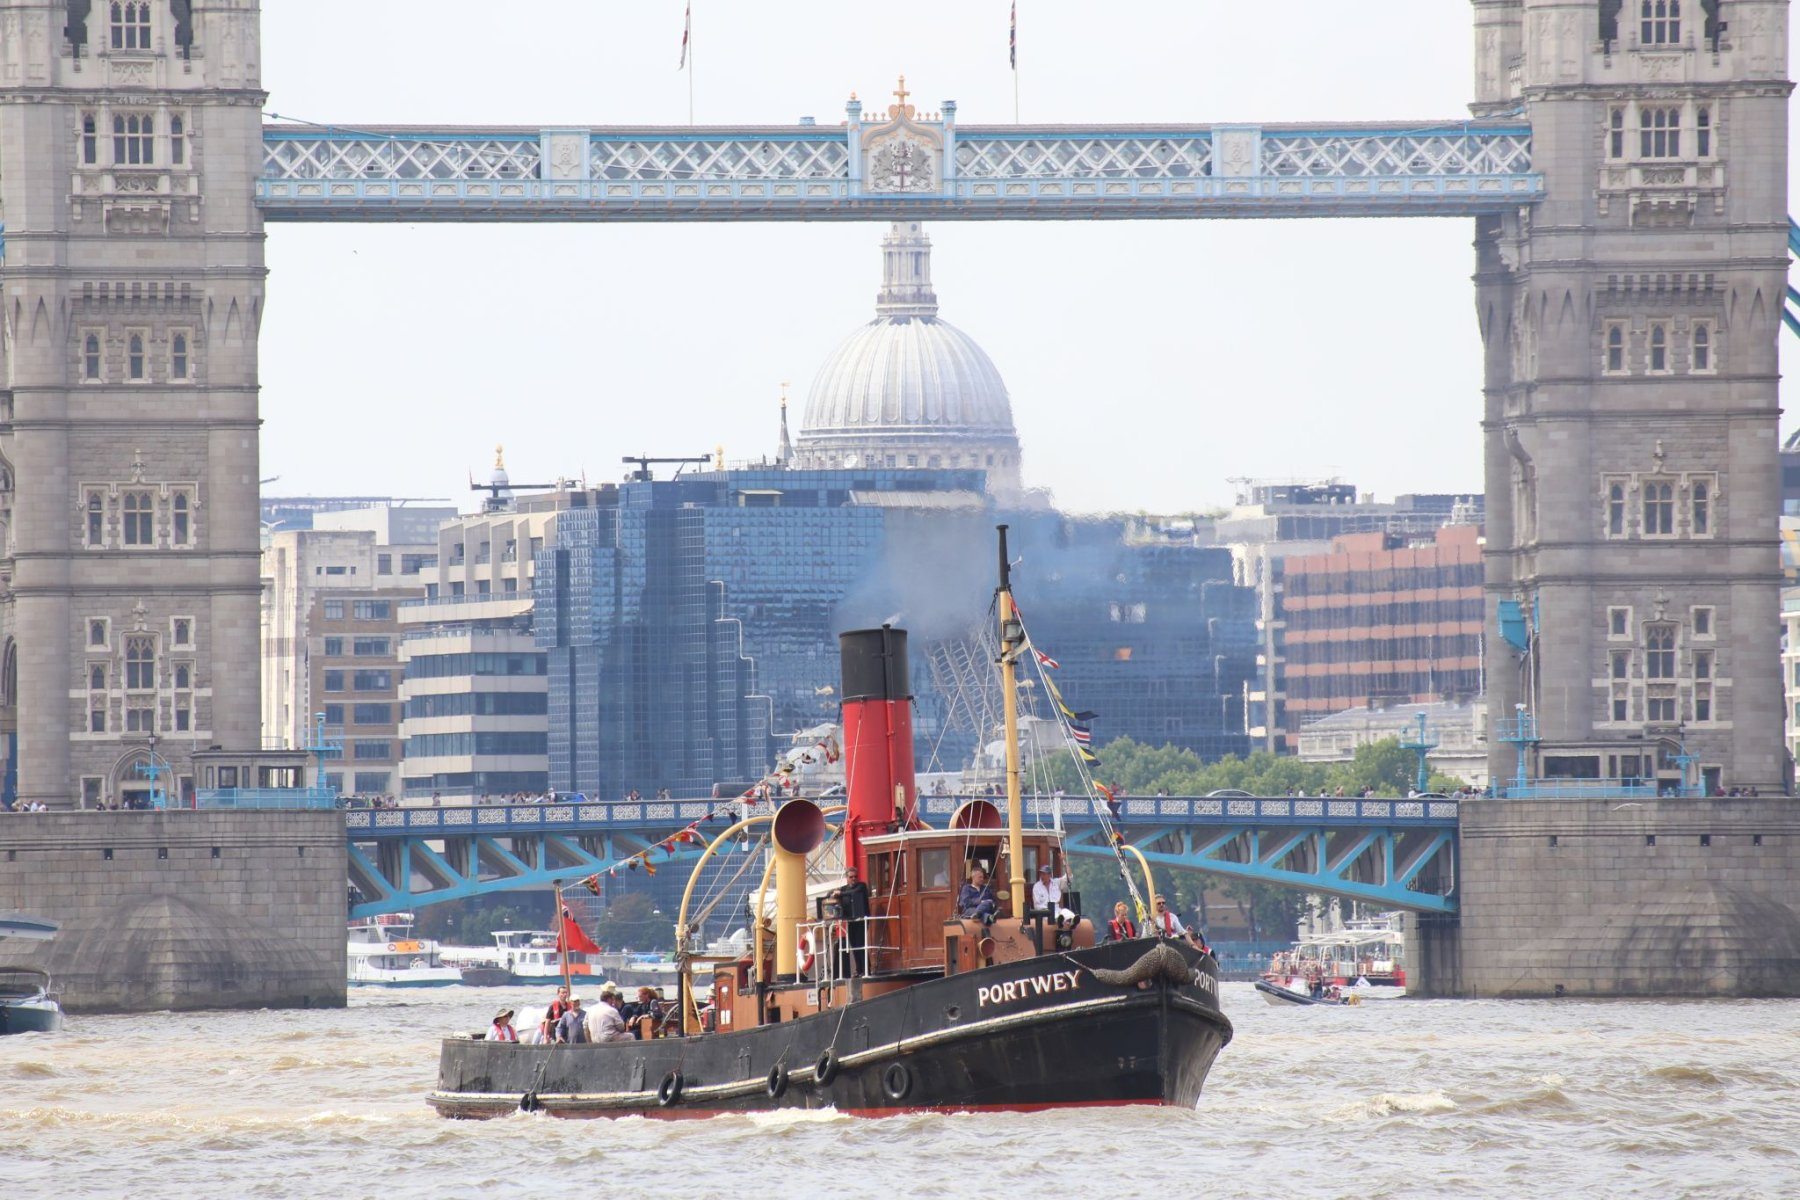 Steam Tug Portwey passes in front of Tower Bridge on the River Thames, 14-Jul-2018